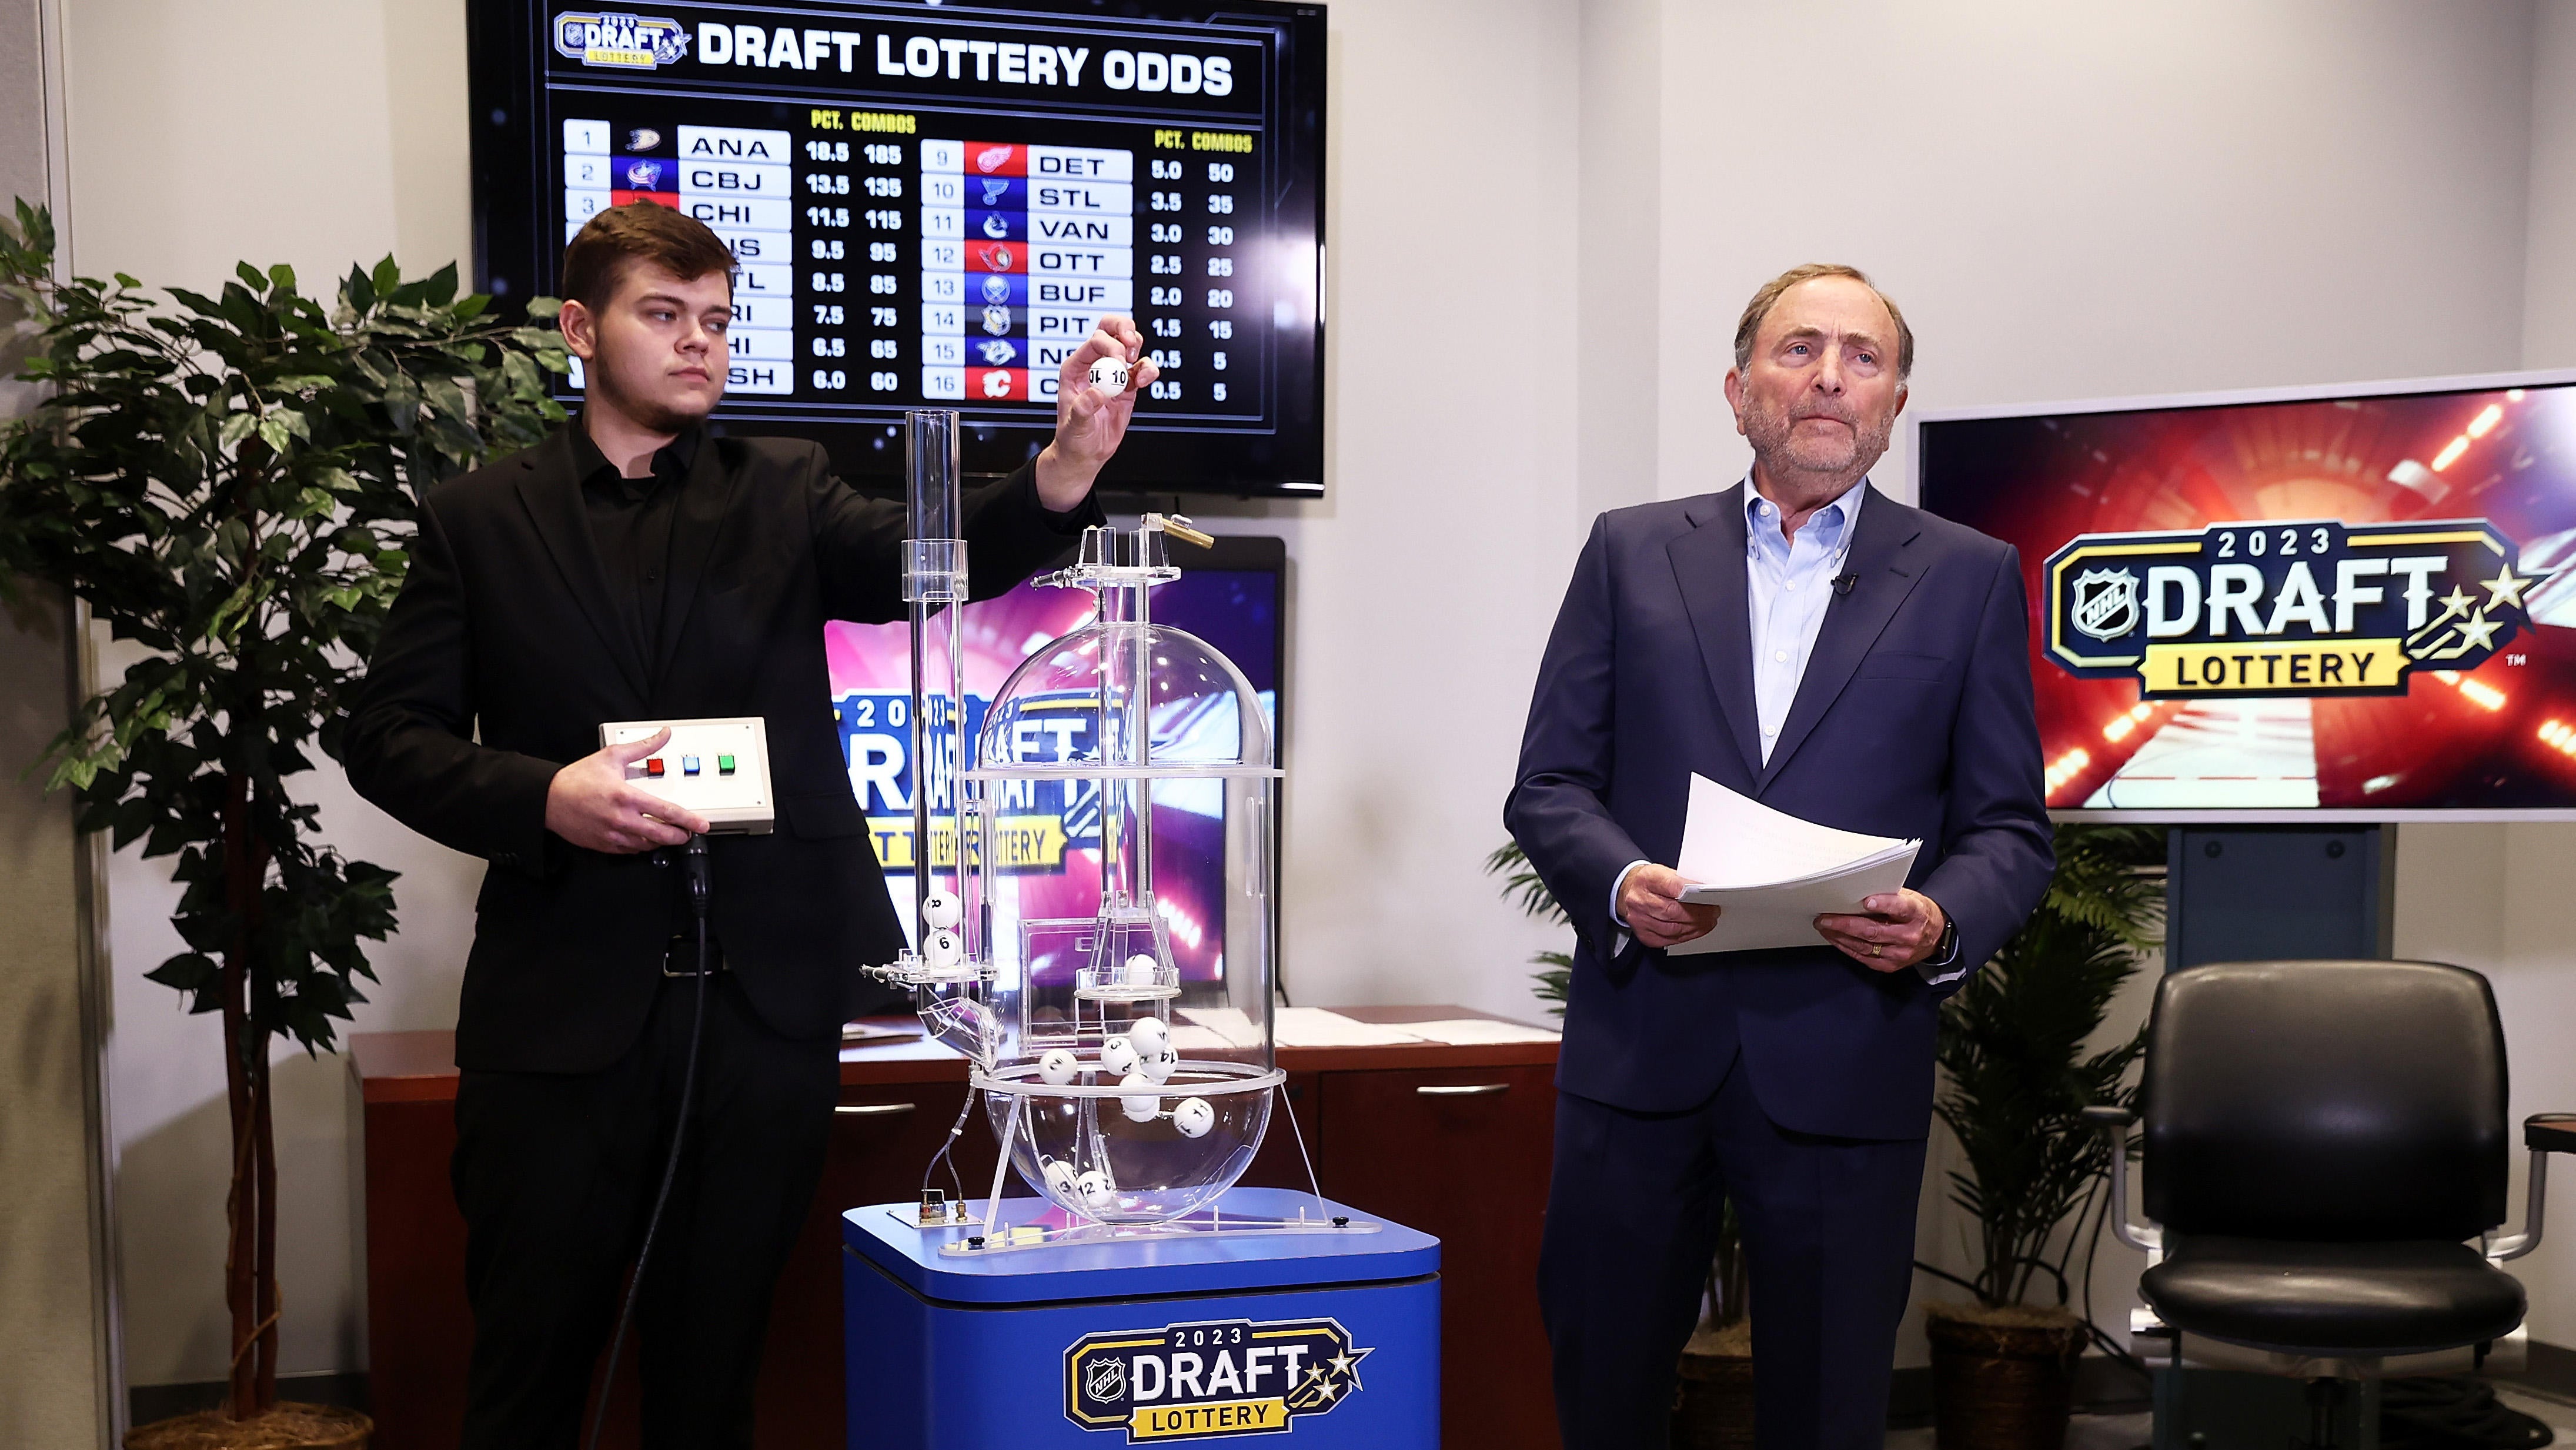 NHL Draft Lottery 2023 results Blackhawks receive top pick after leapfrogging Ducks; Blue Jackets at No